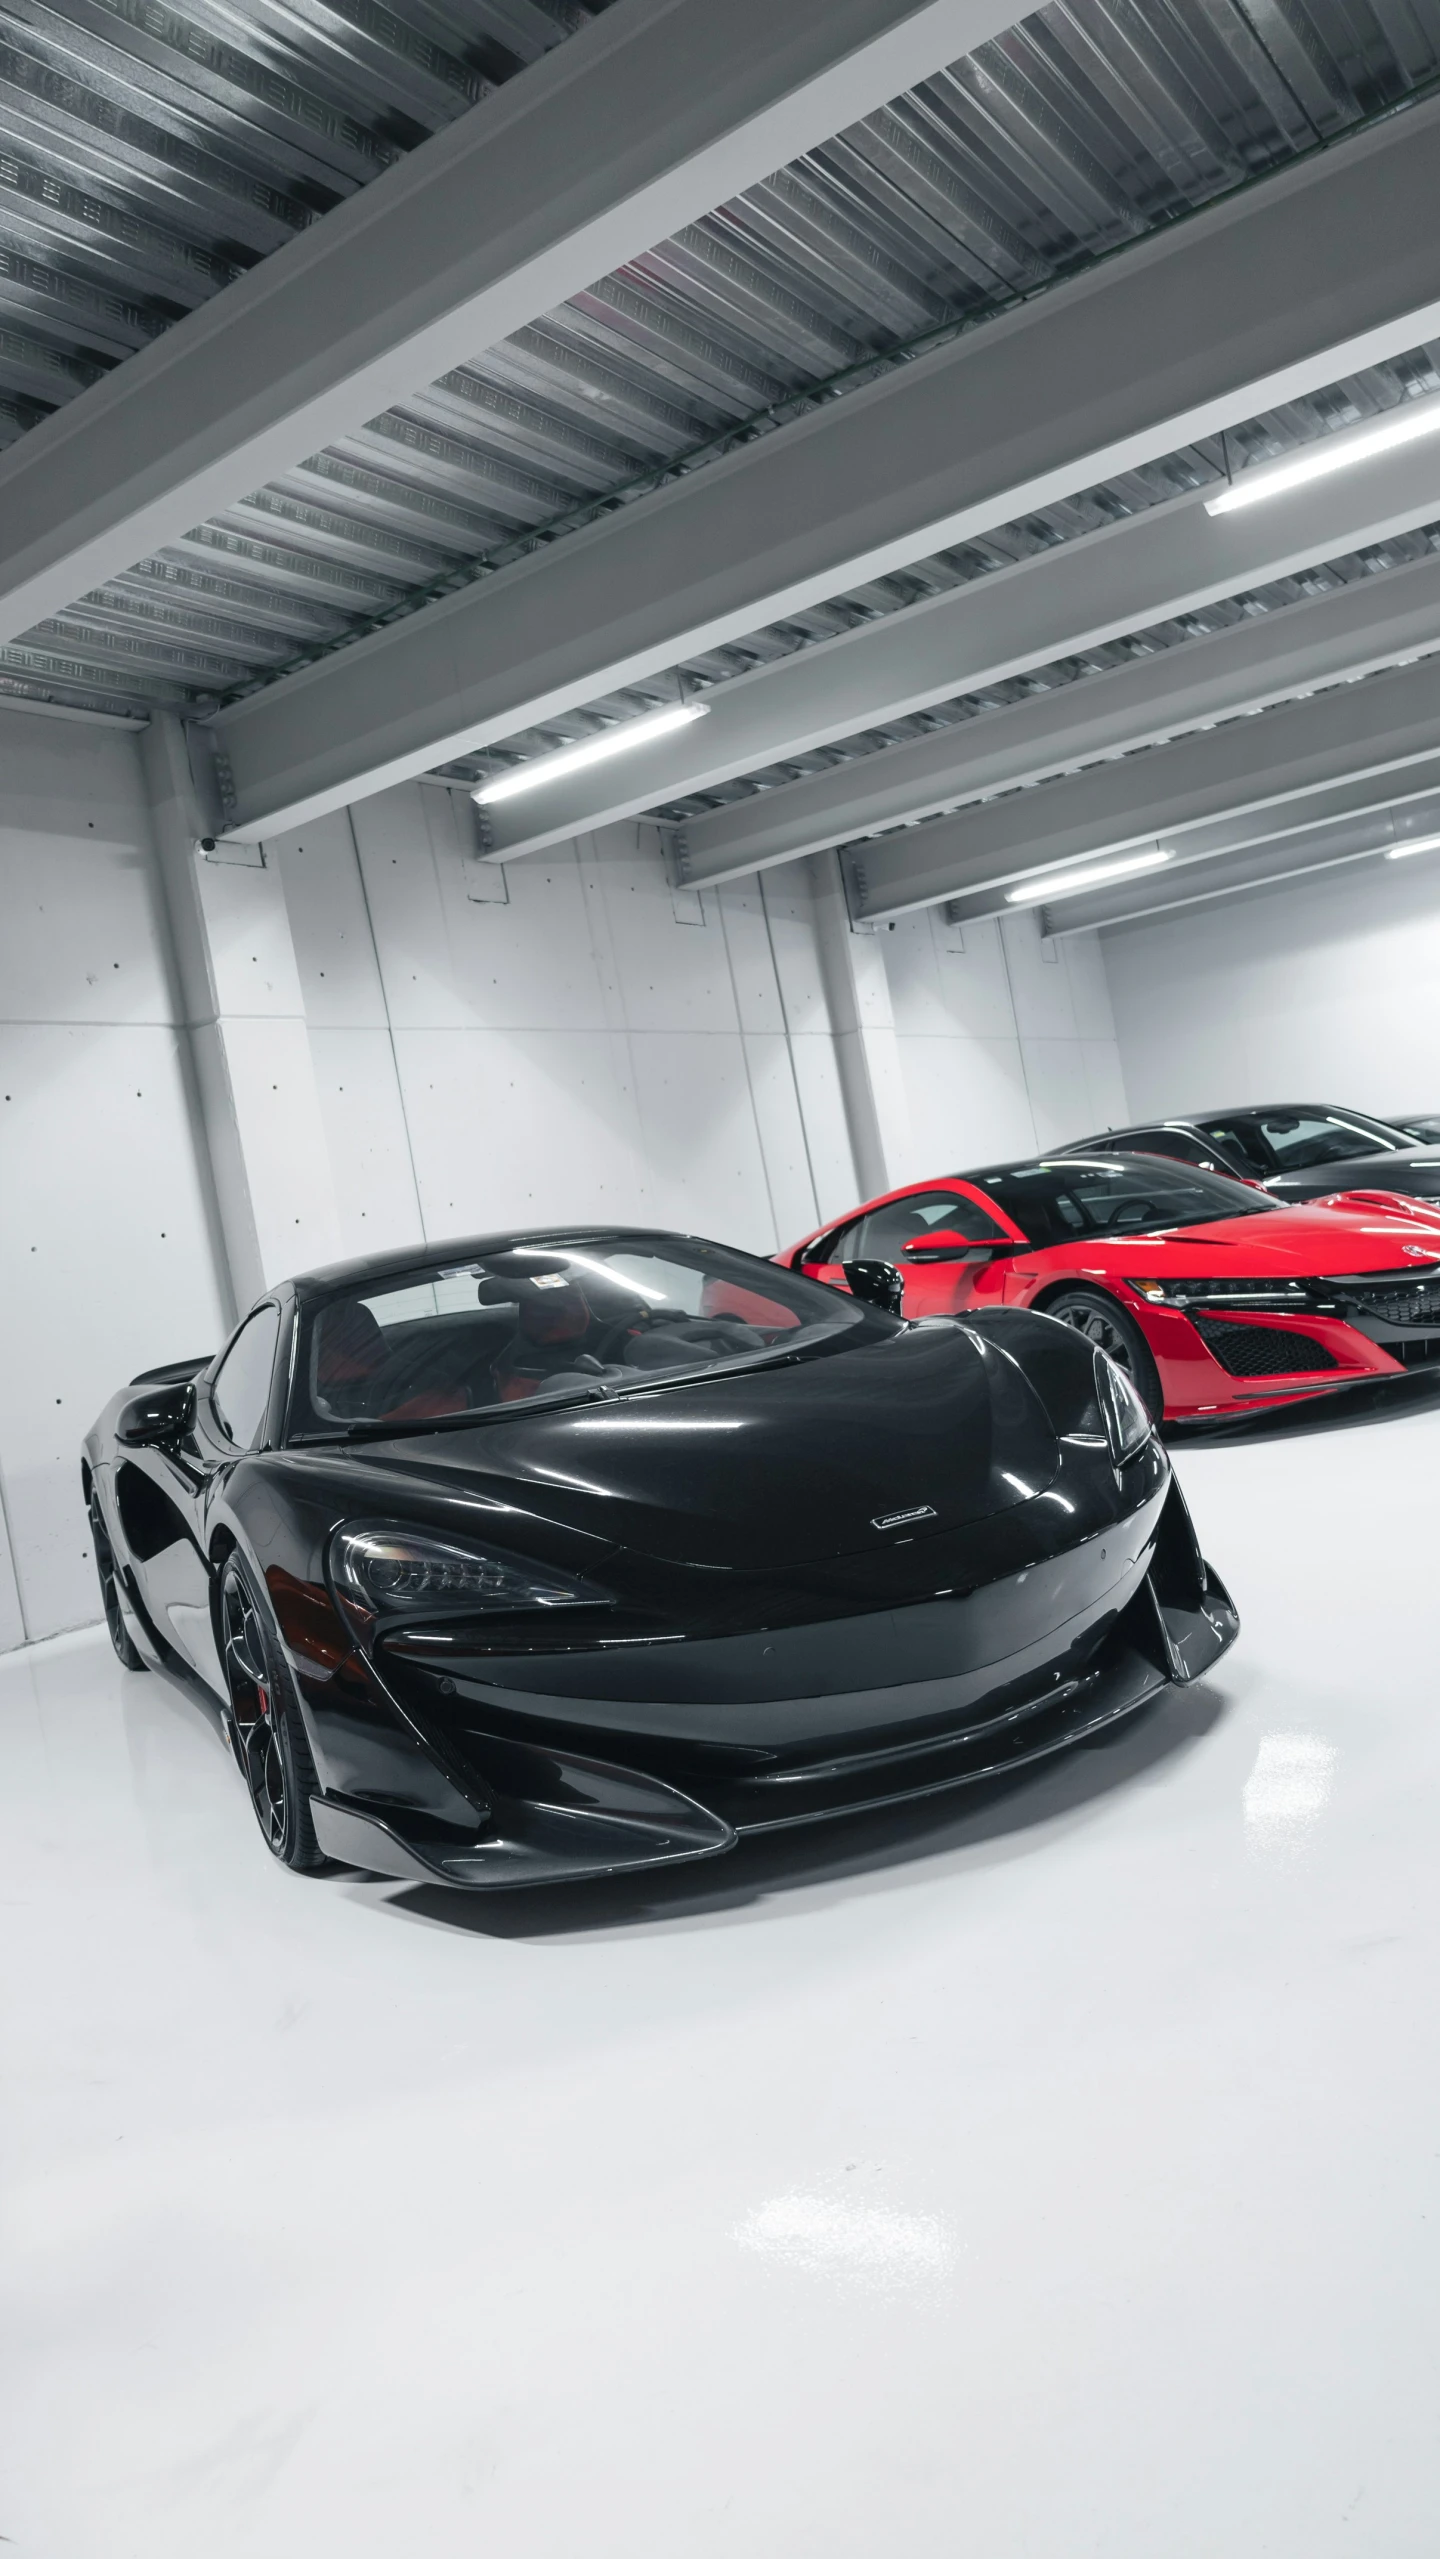 a black sports car in the garage with other red cars